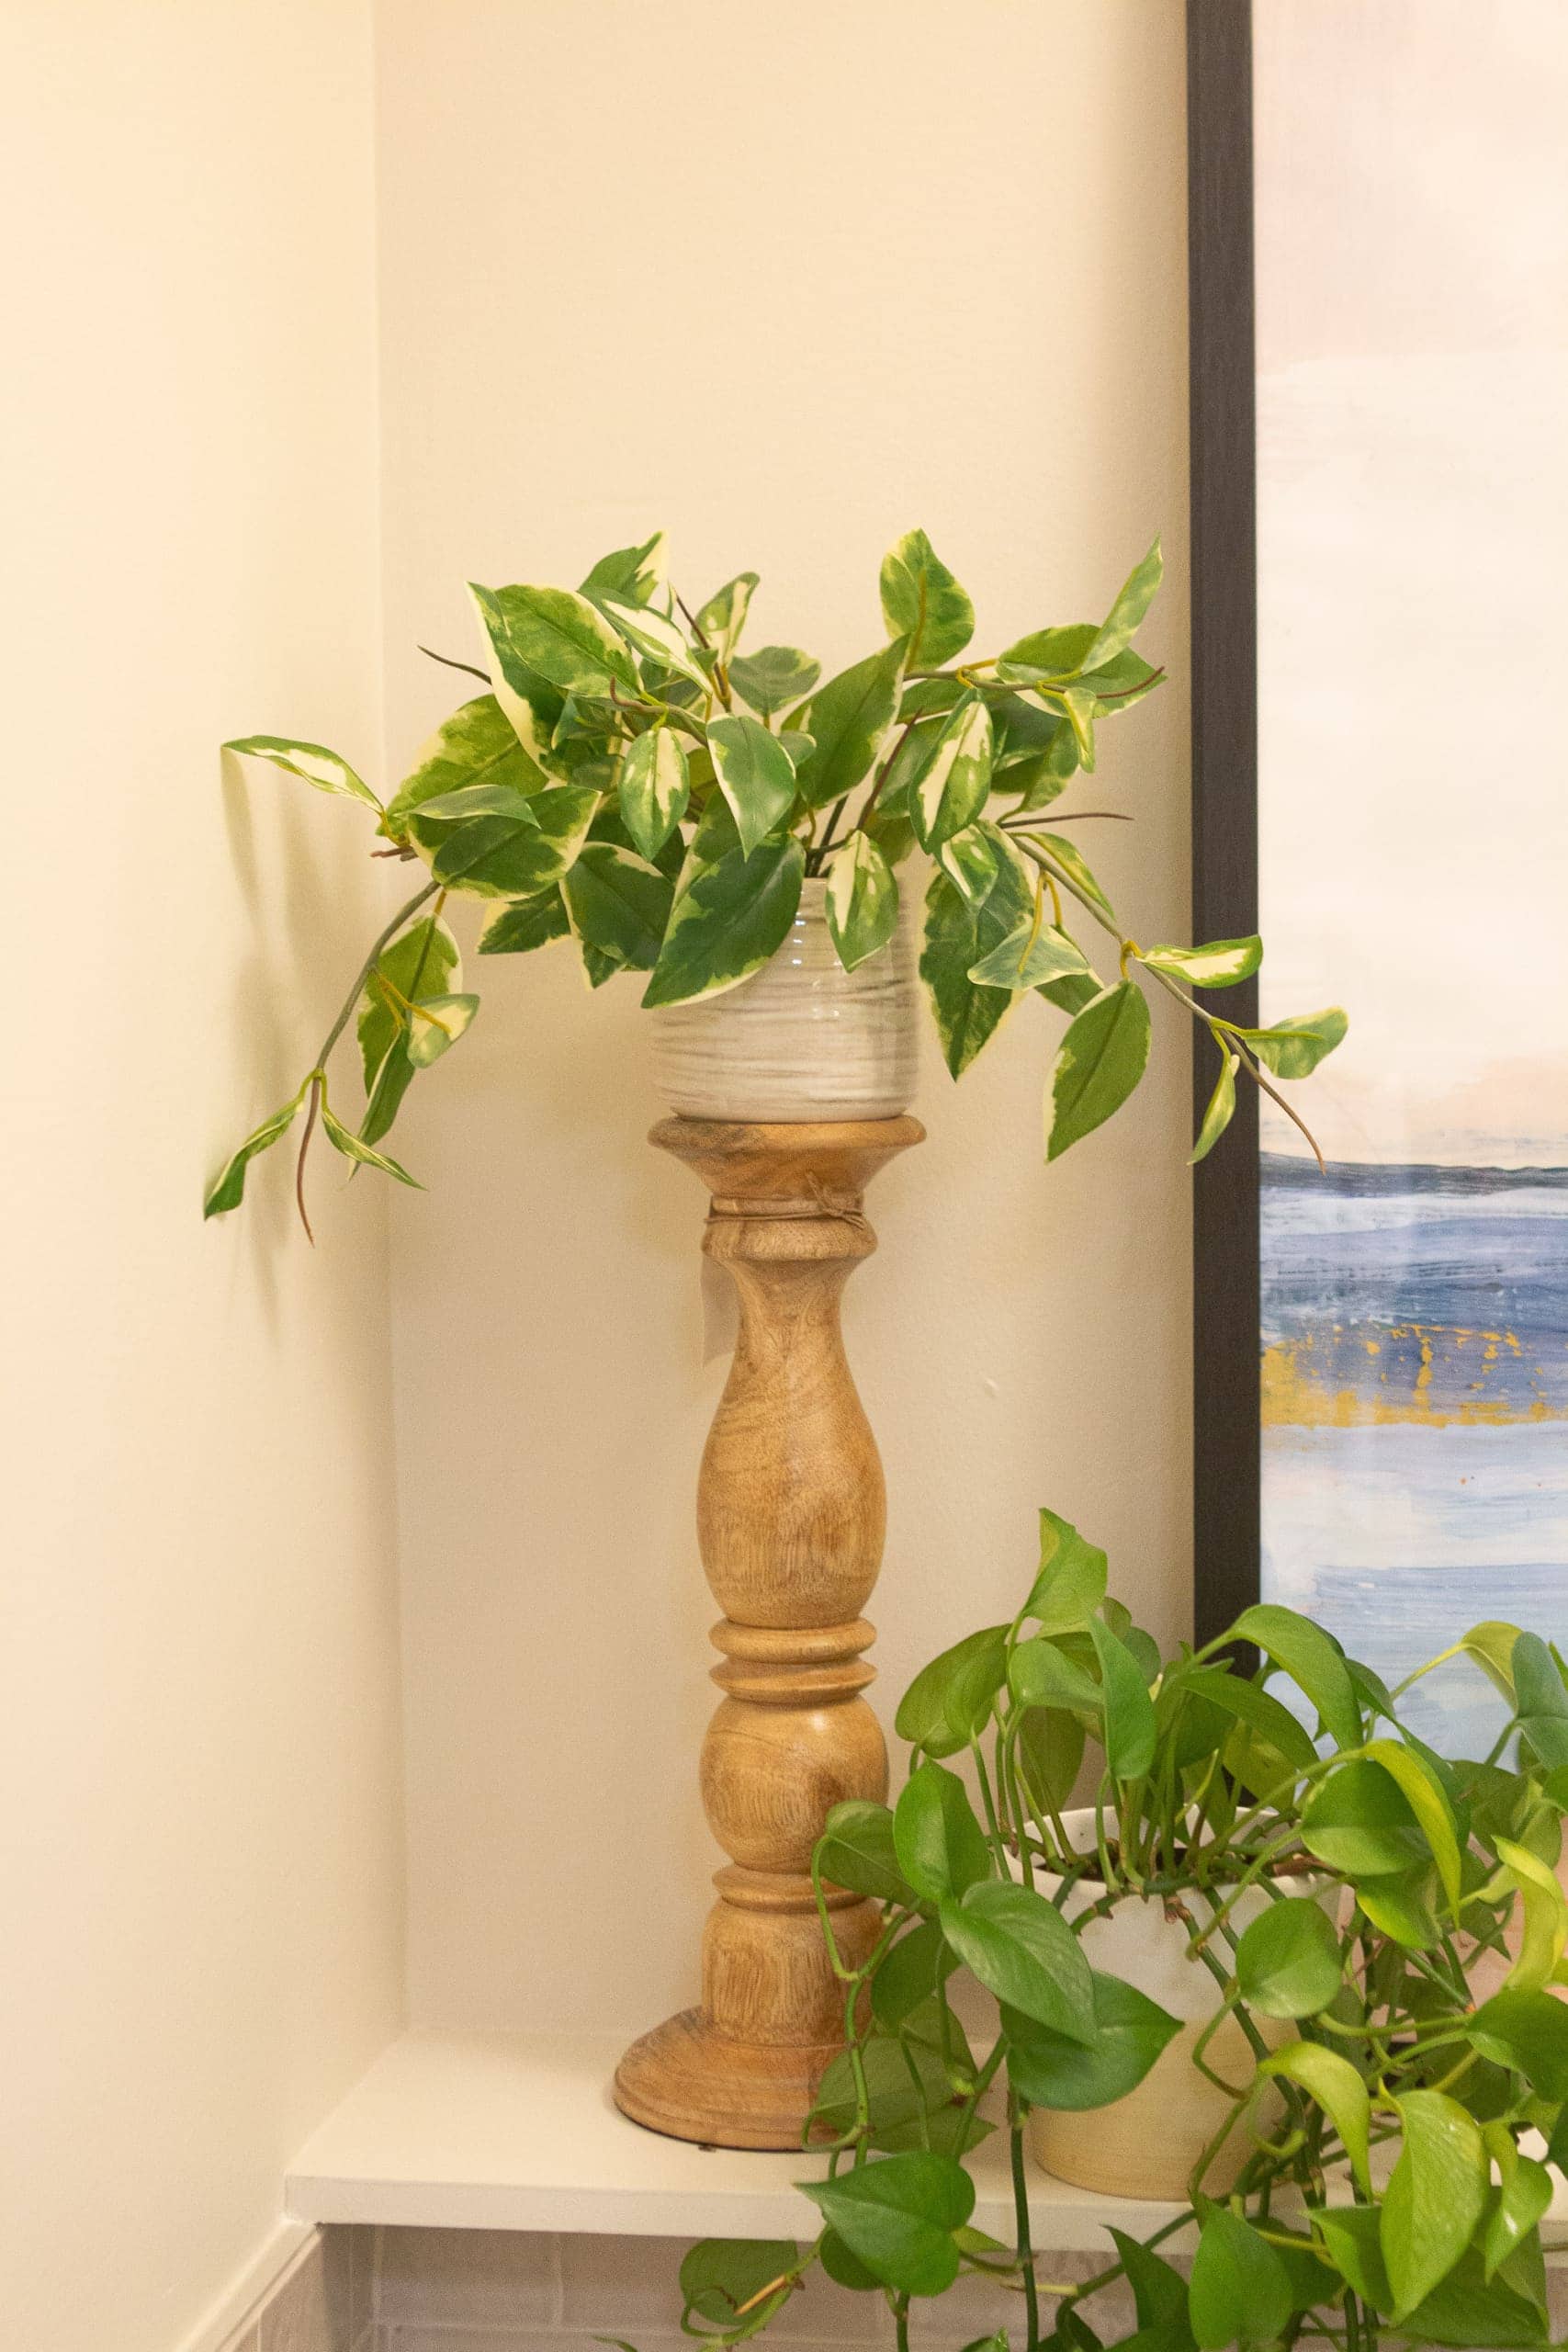 Using faux and real plants in a bathroom